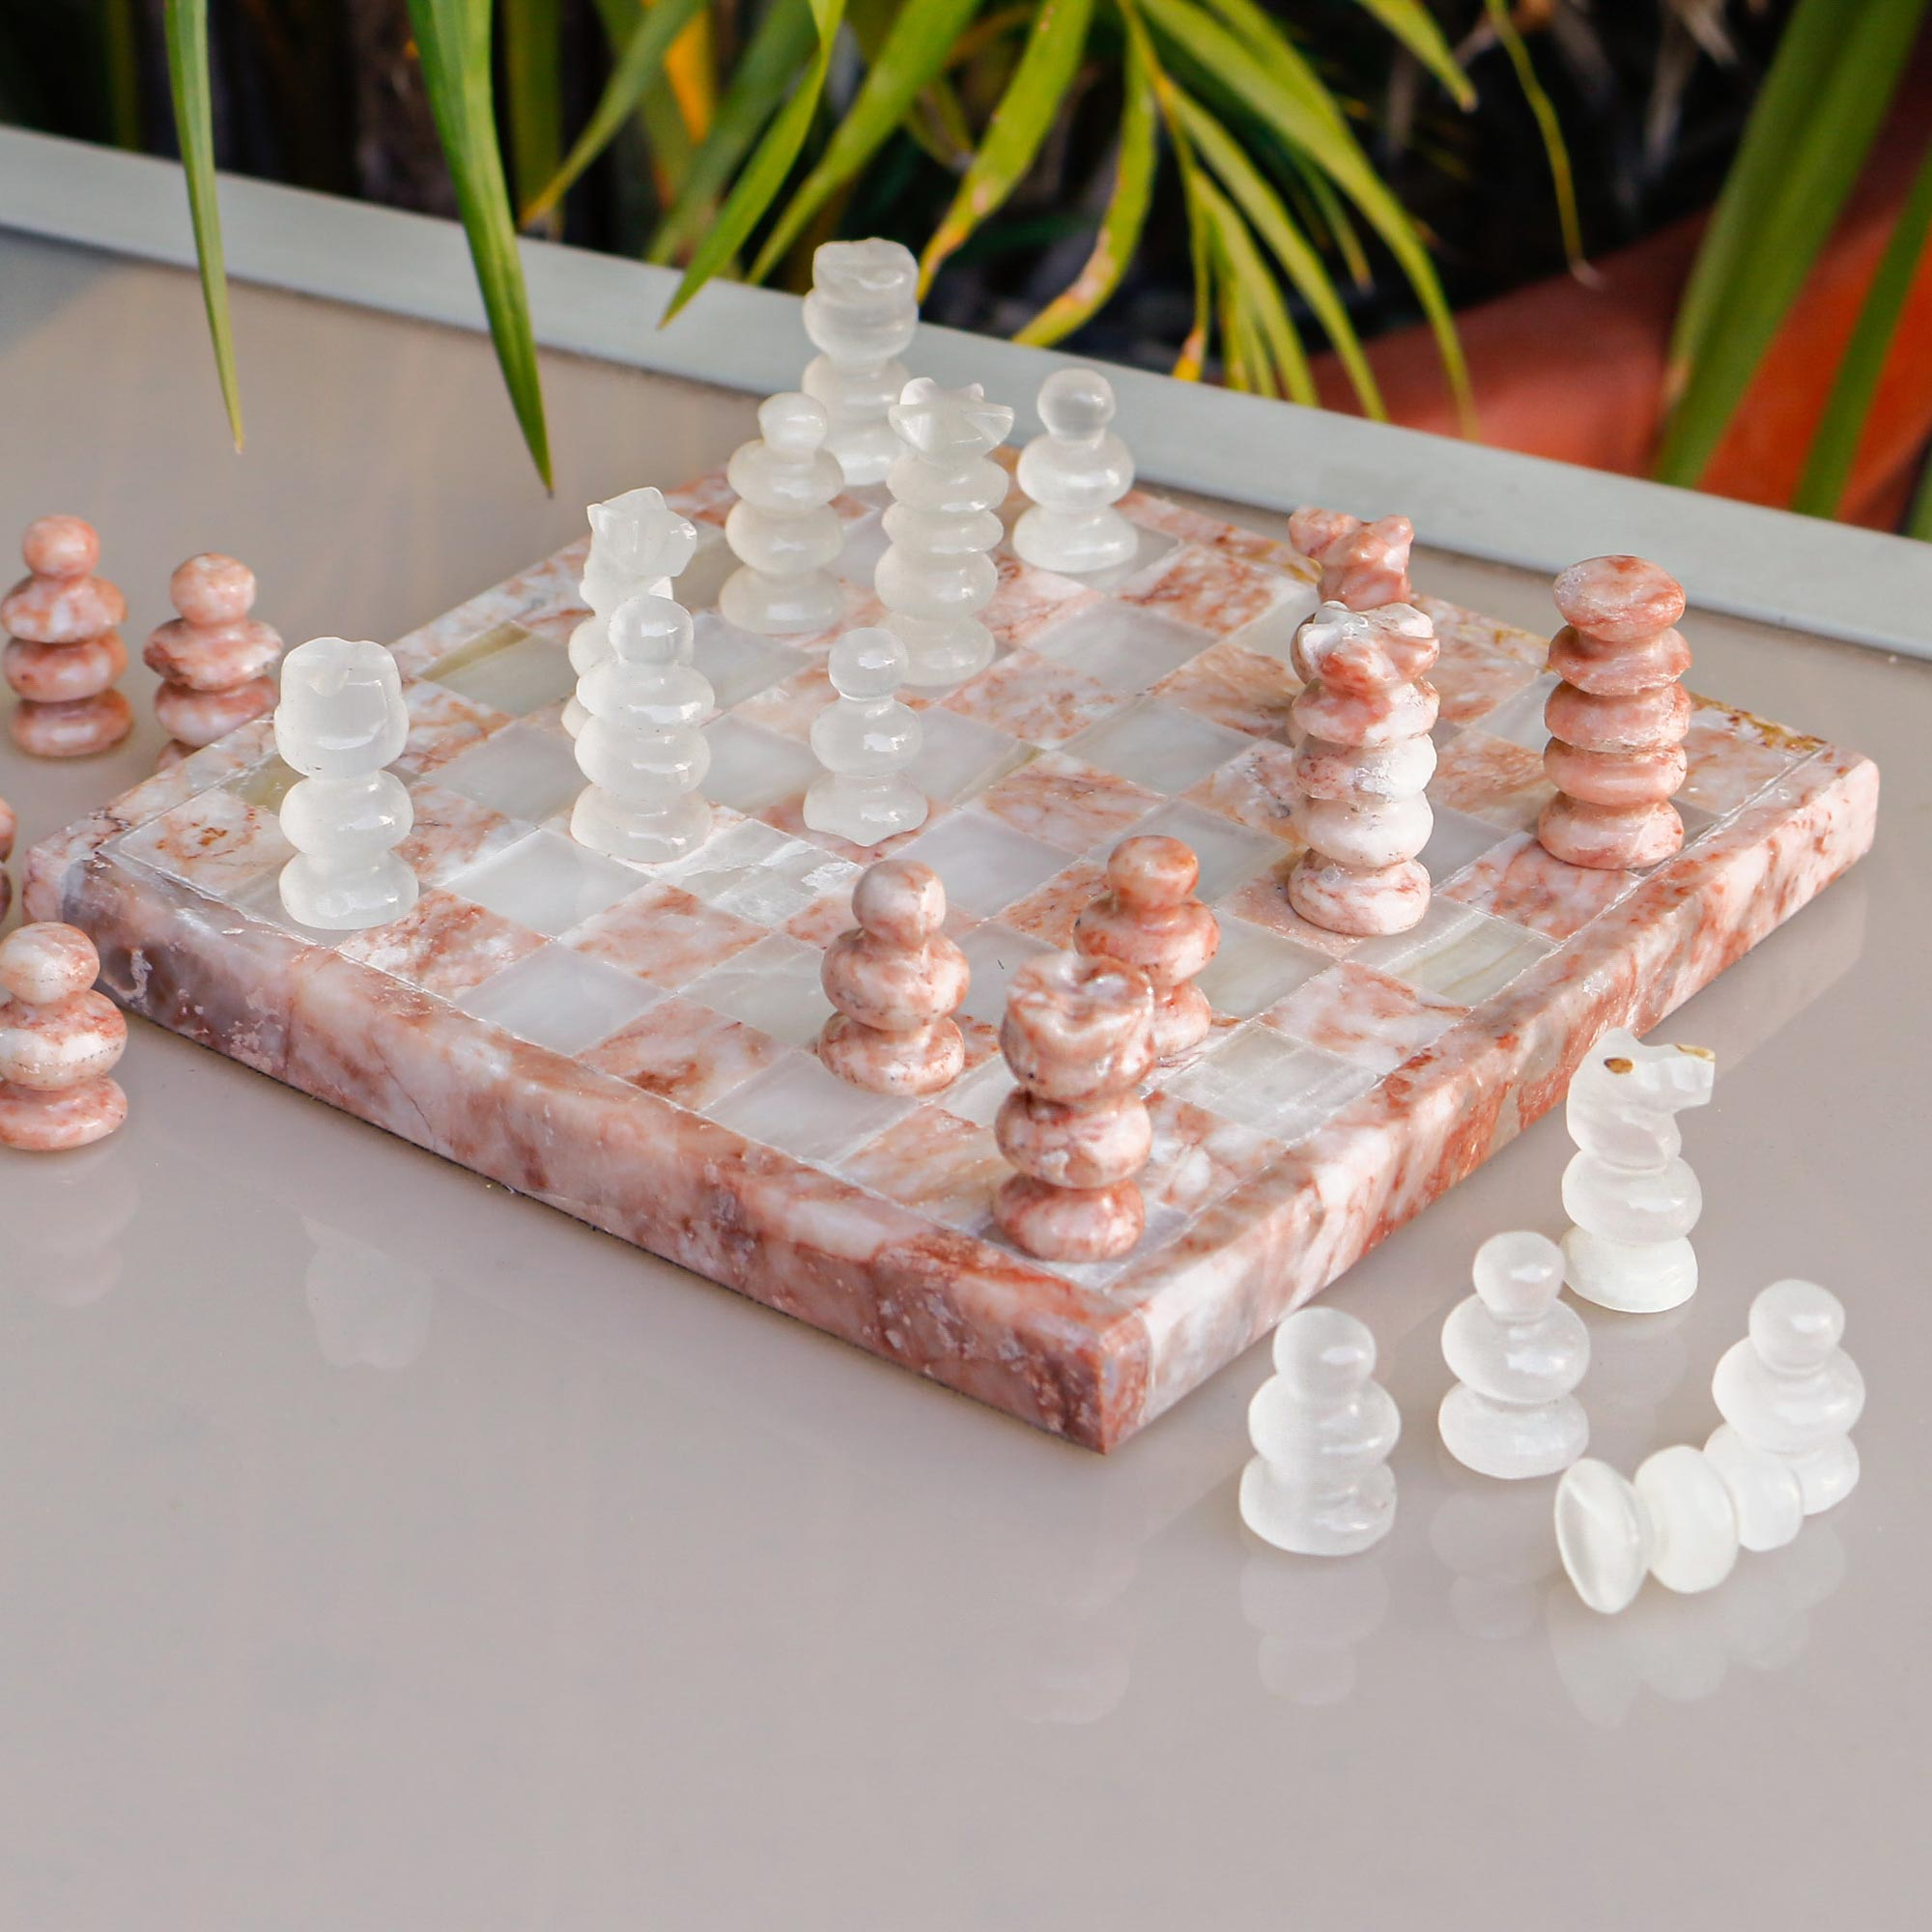 33 Cool Chess Gifts Guaranteed To Checkmate Any Chess Enthusiast